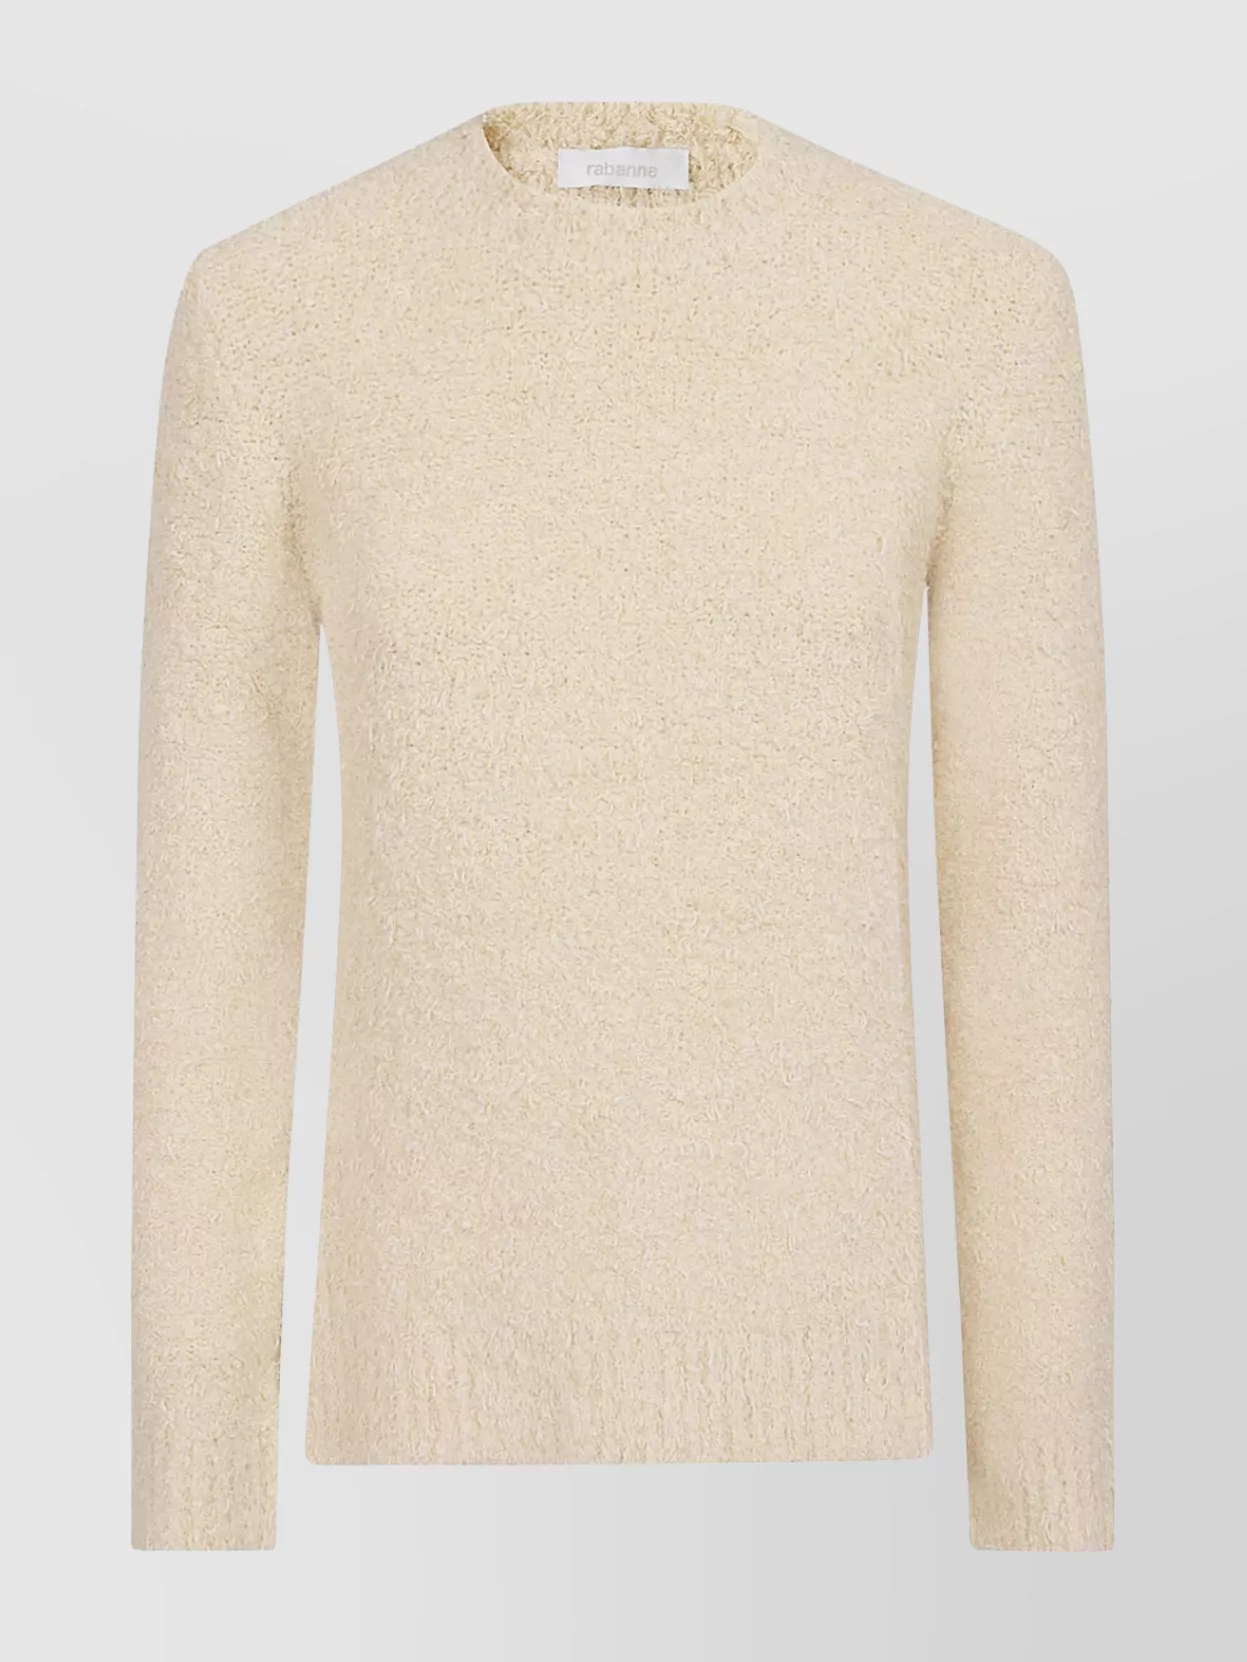 Shop Rabanne Knit Crew Neck Sweater Textured Ribbed